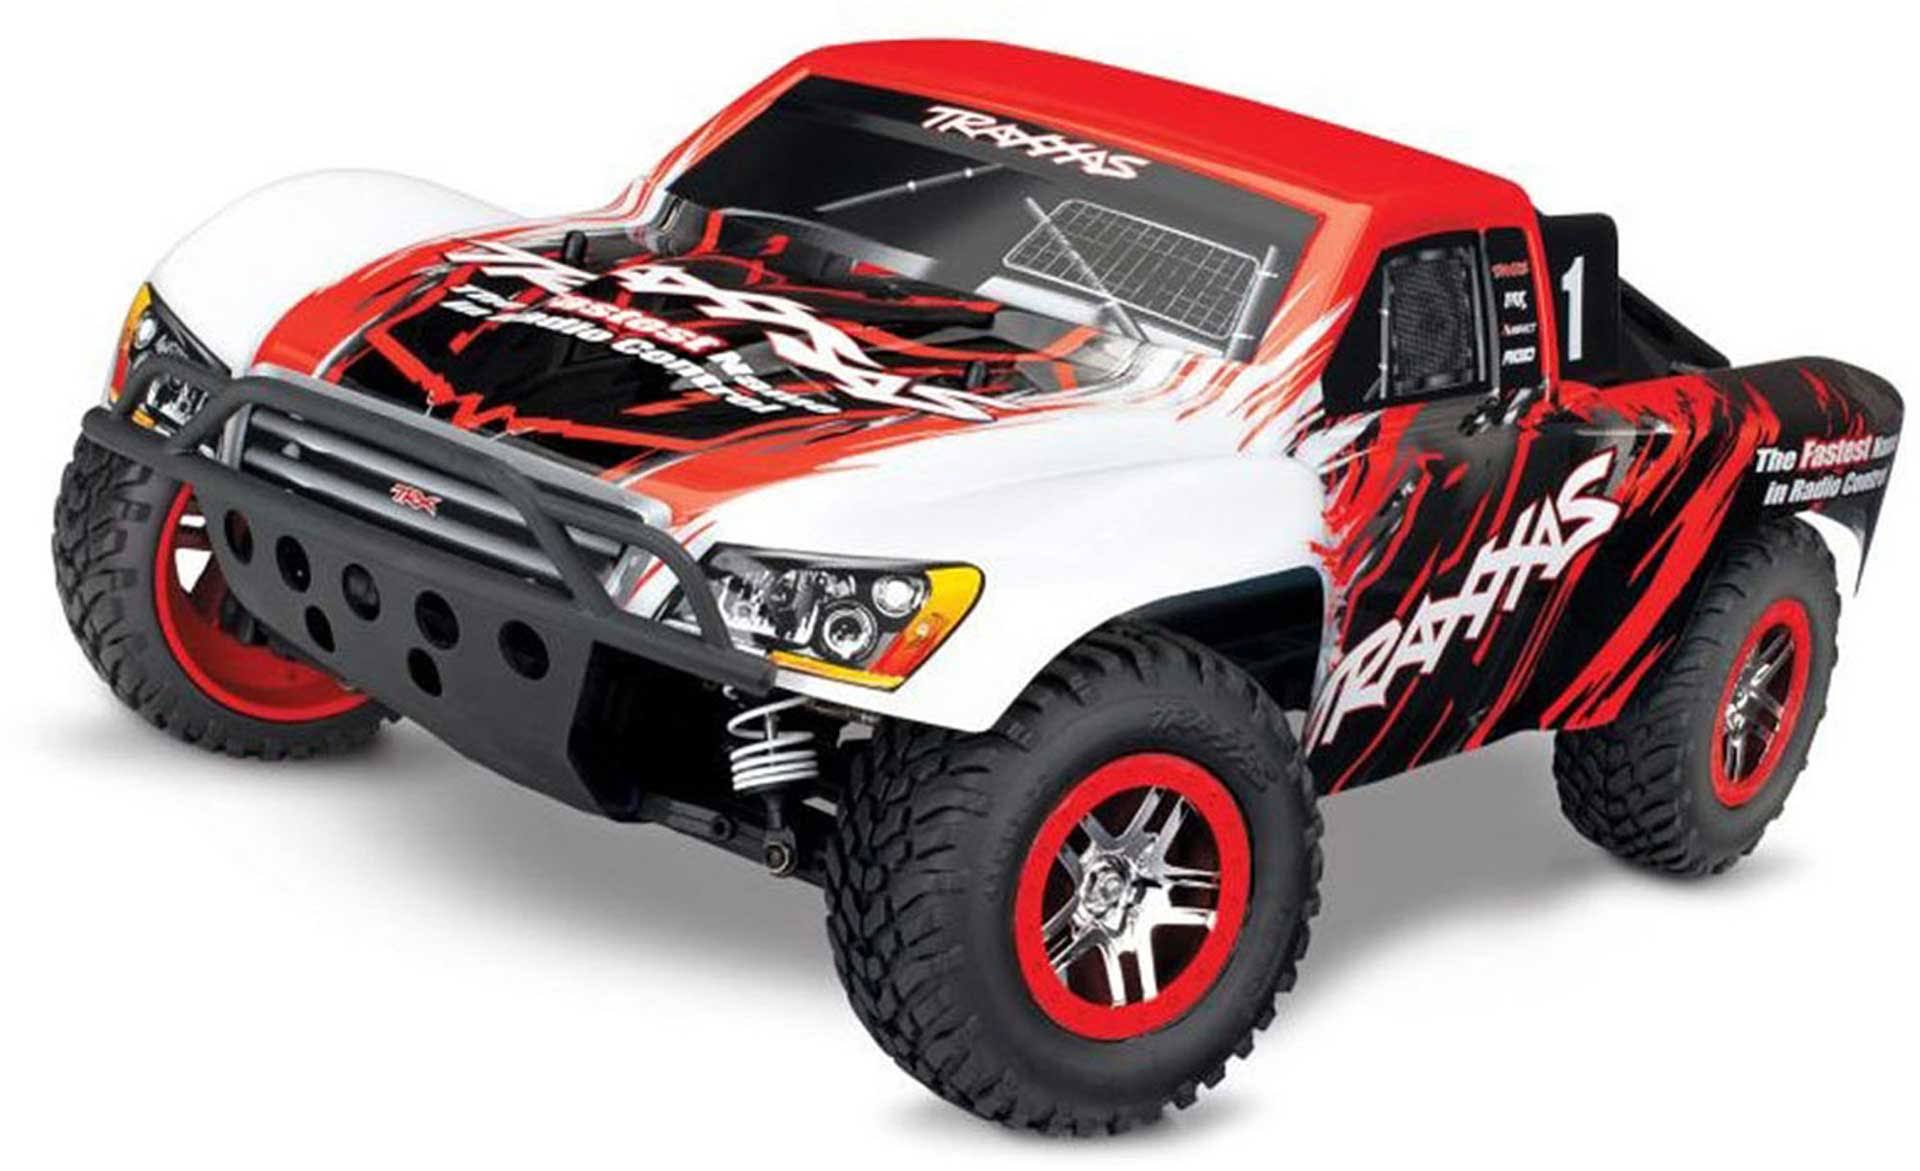 Traxxas 68086-4 Slash 4x4 1/10 4WD Brushless Short Course Truck (Red)